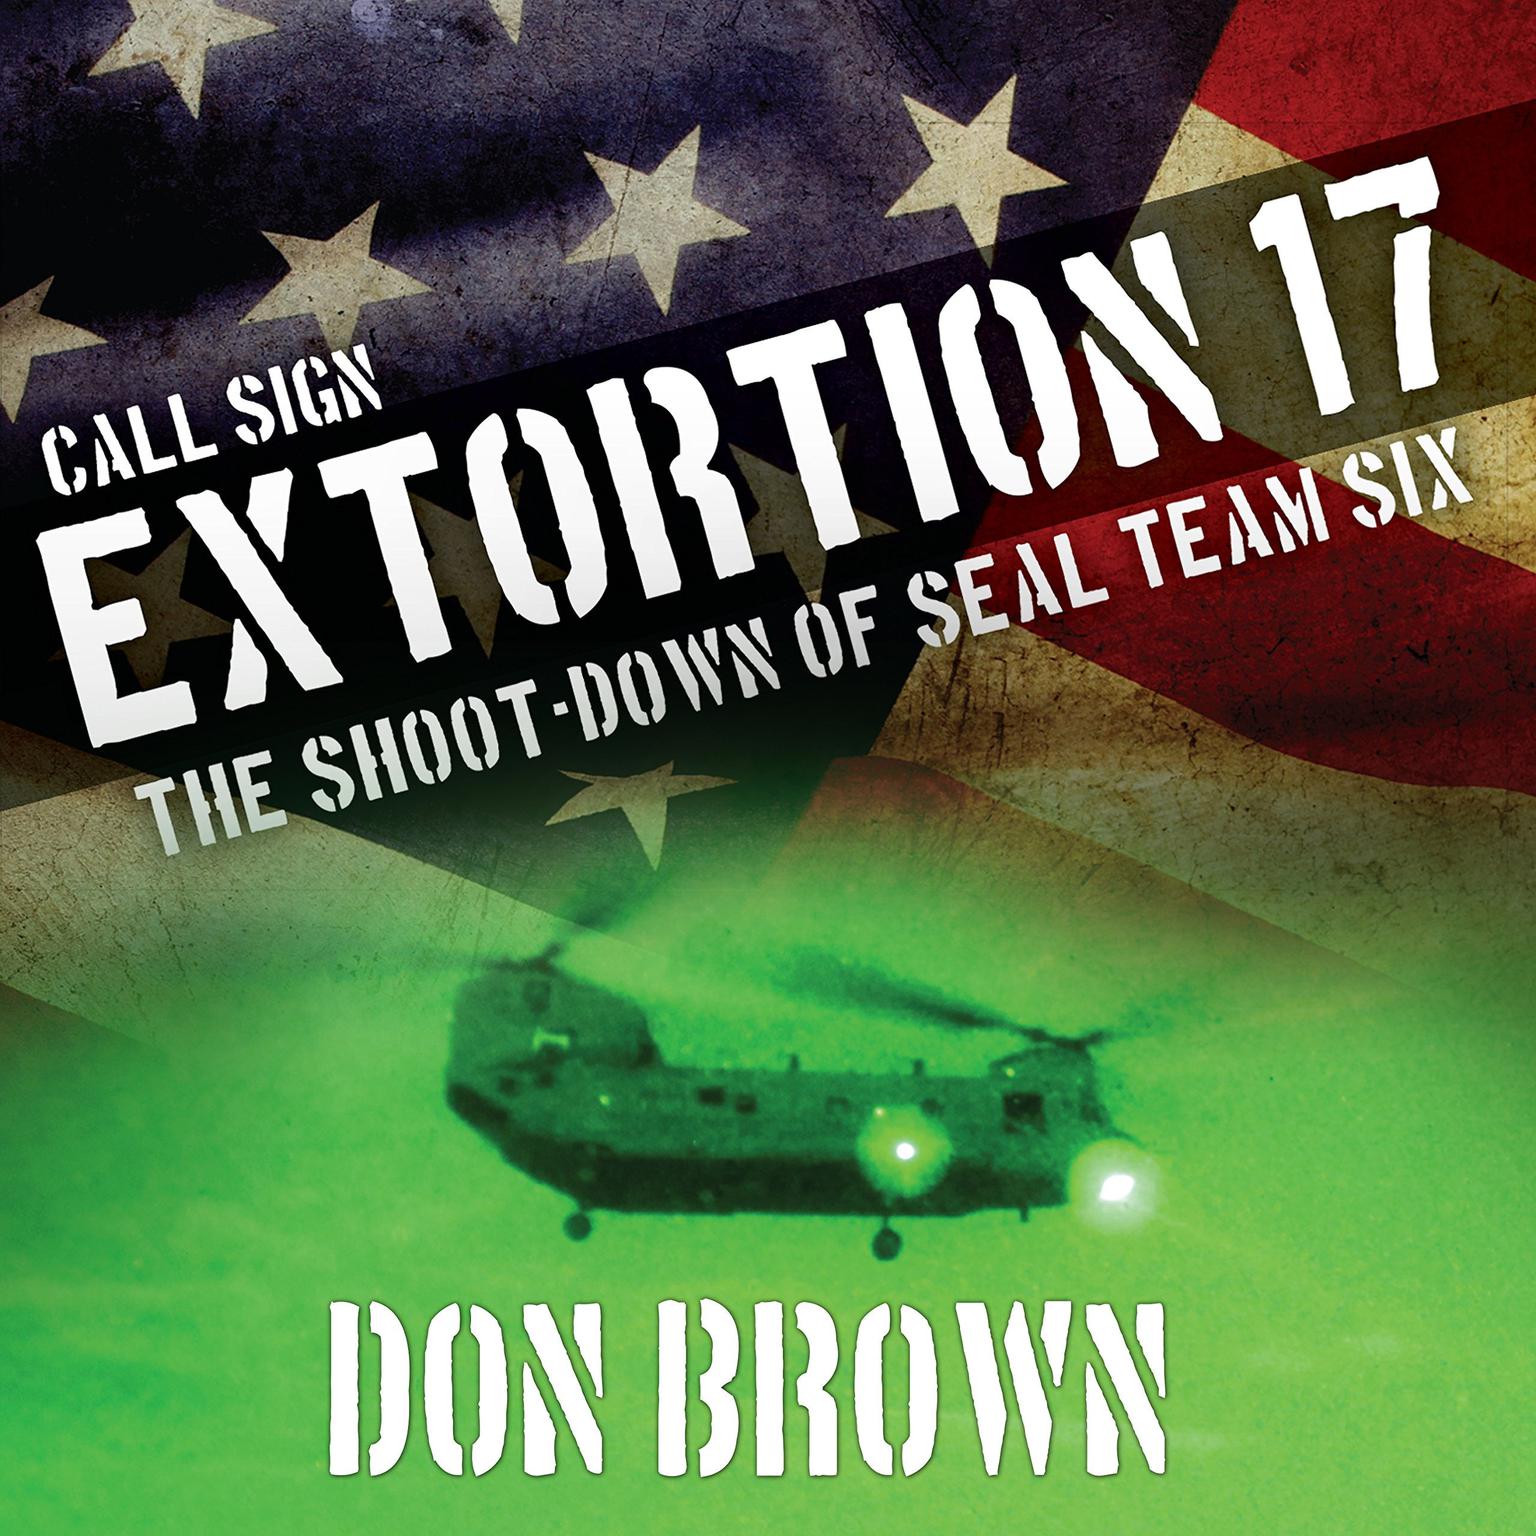 Call Sign Extortion 17: The Shoot-down of Seal Team Six Audiobook, by Don Brown